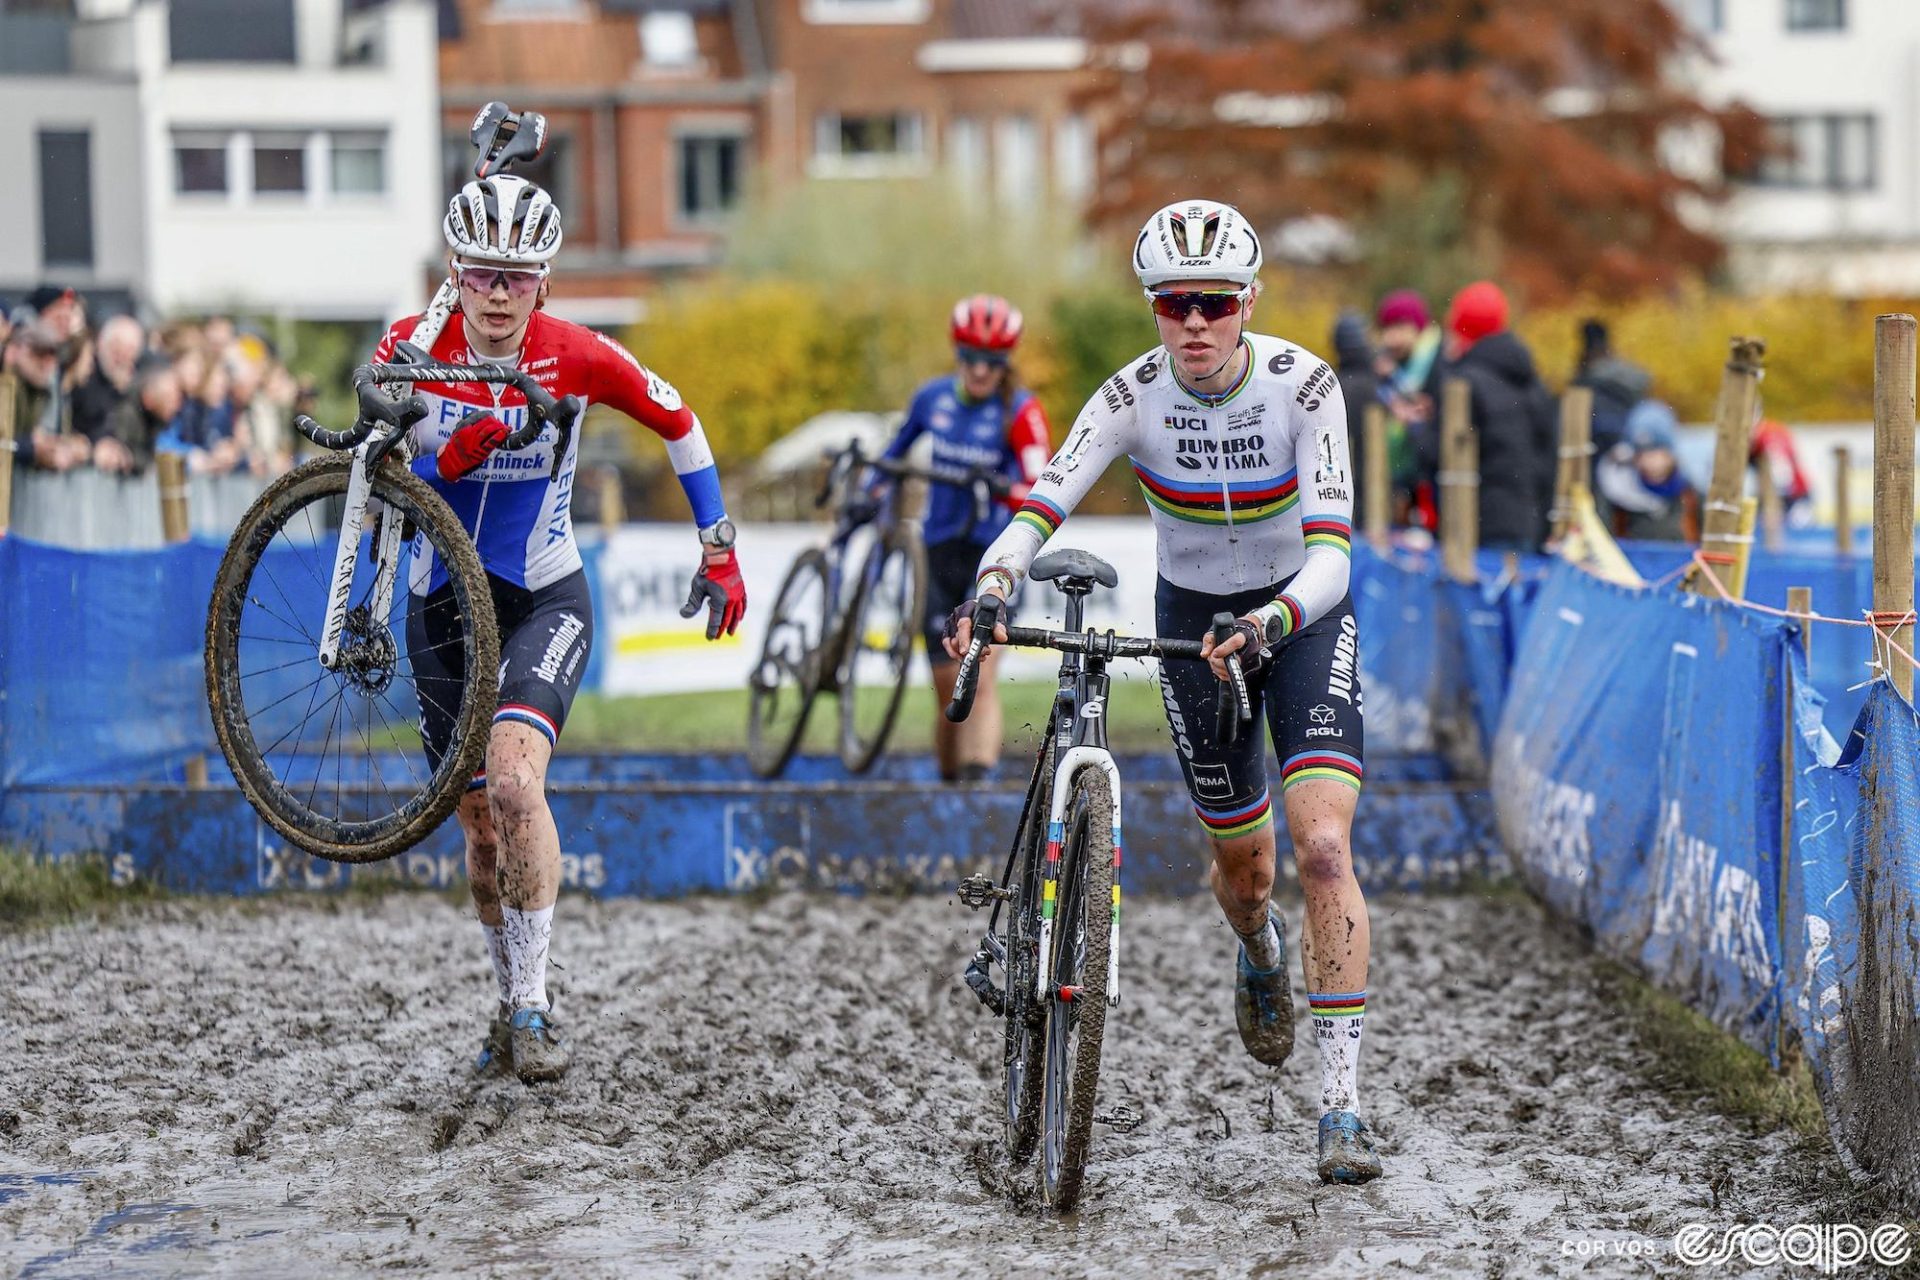 Fem van Empel runs her bike in the mud at a cyclocross race. She's just slightly ahead of rival Puck Pieterse, as both have crossed a set of barriers.